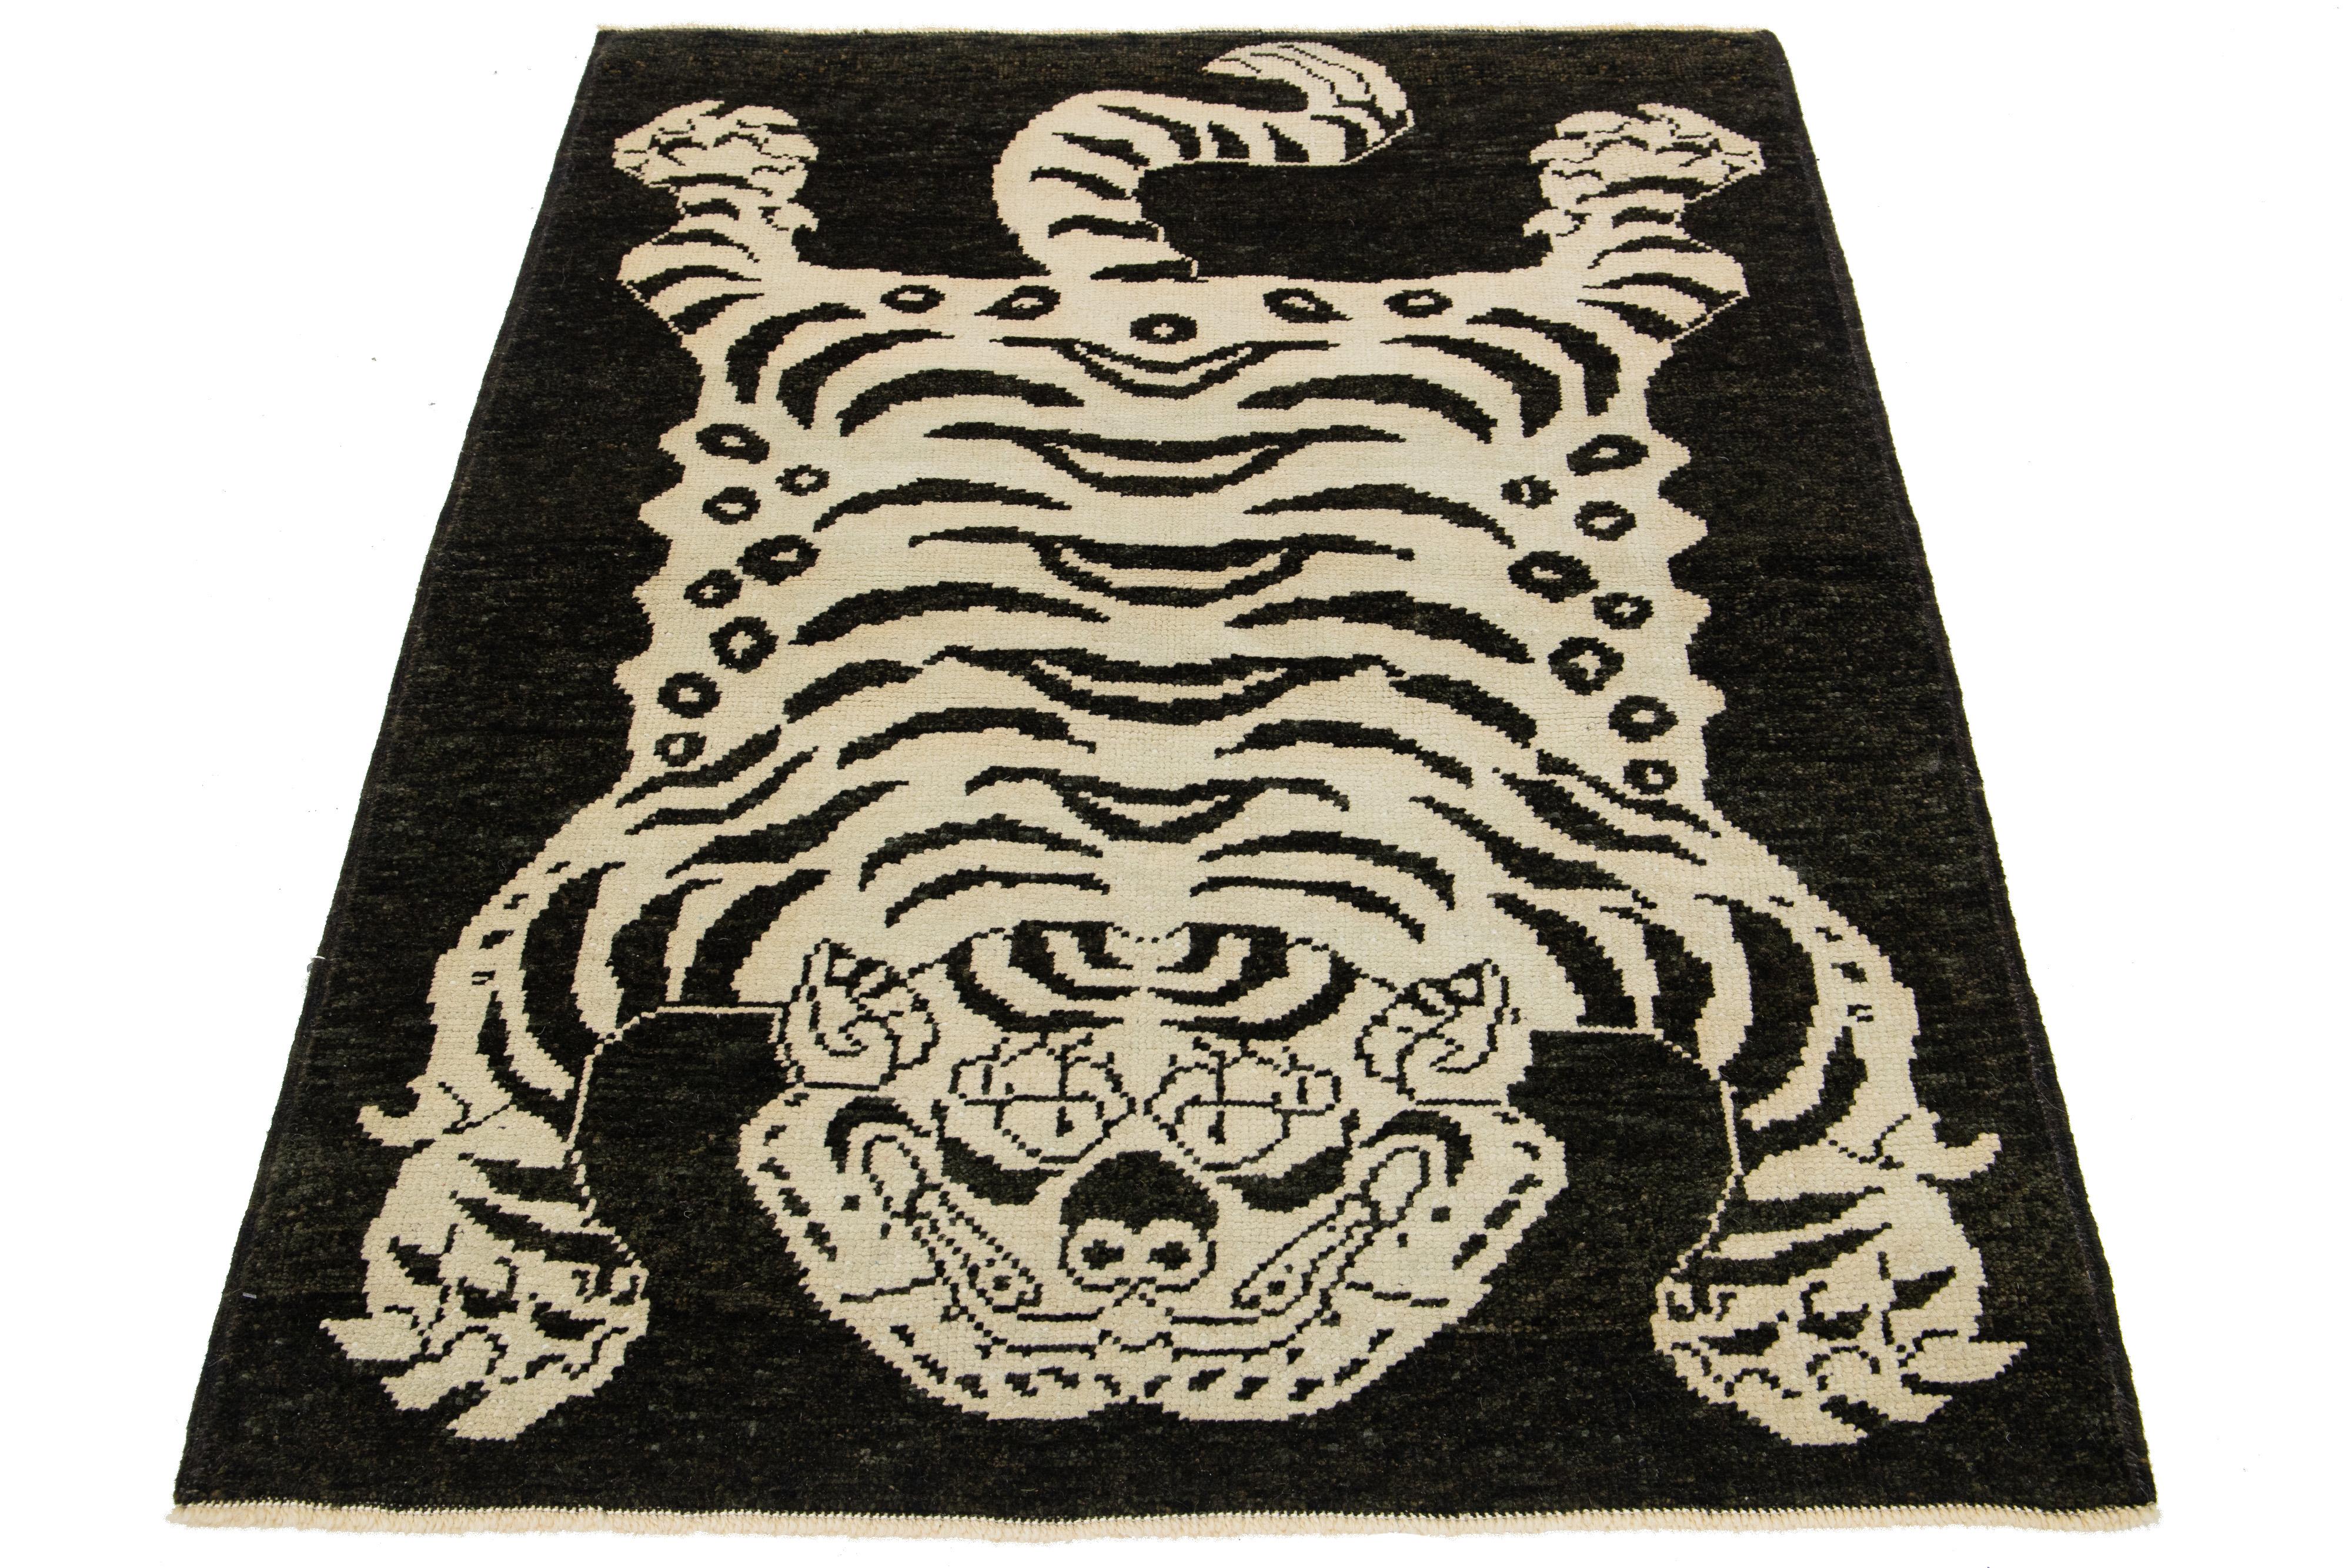 This Turkish Art Deco wool rug boasts a striking black backdrop with beige accents and a captivating pictorial representation of a tiger.

This rug measures 4'4